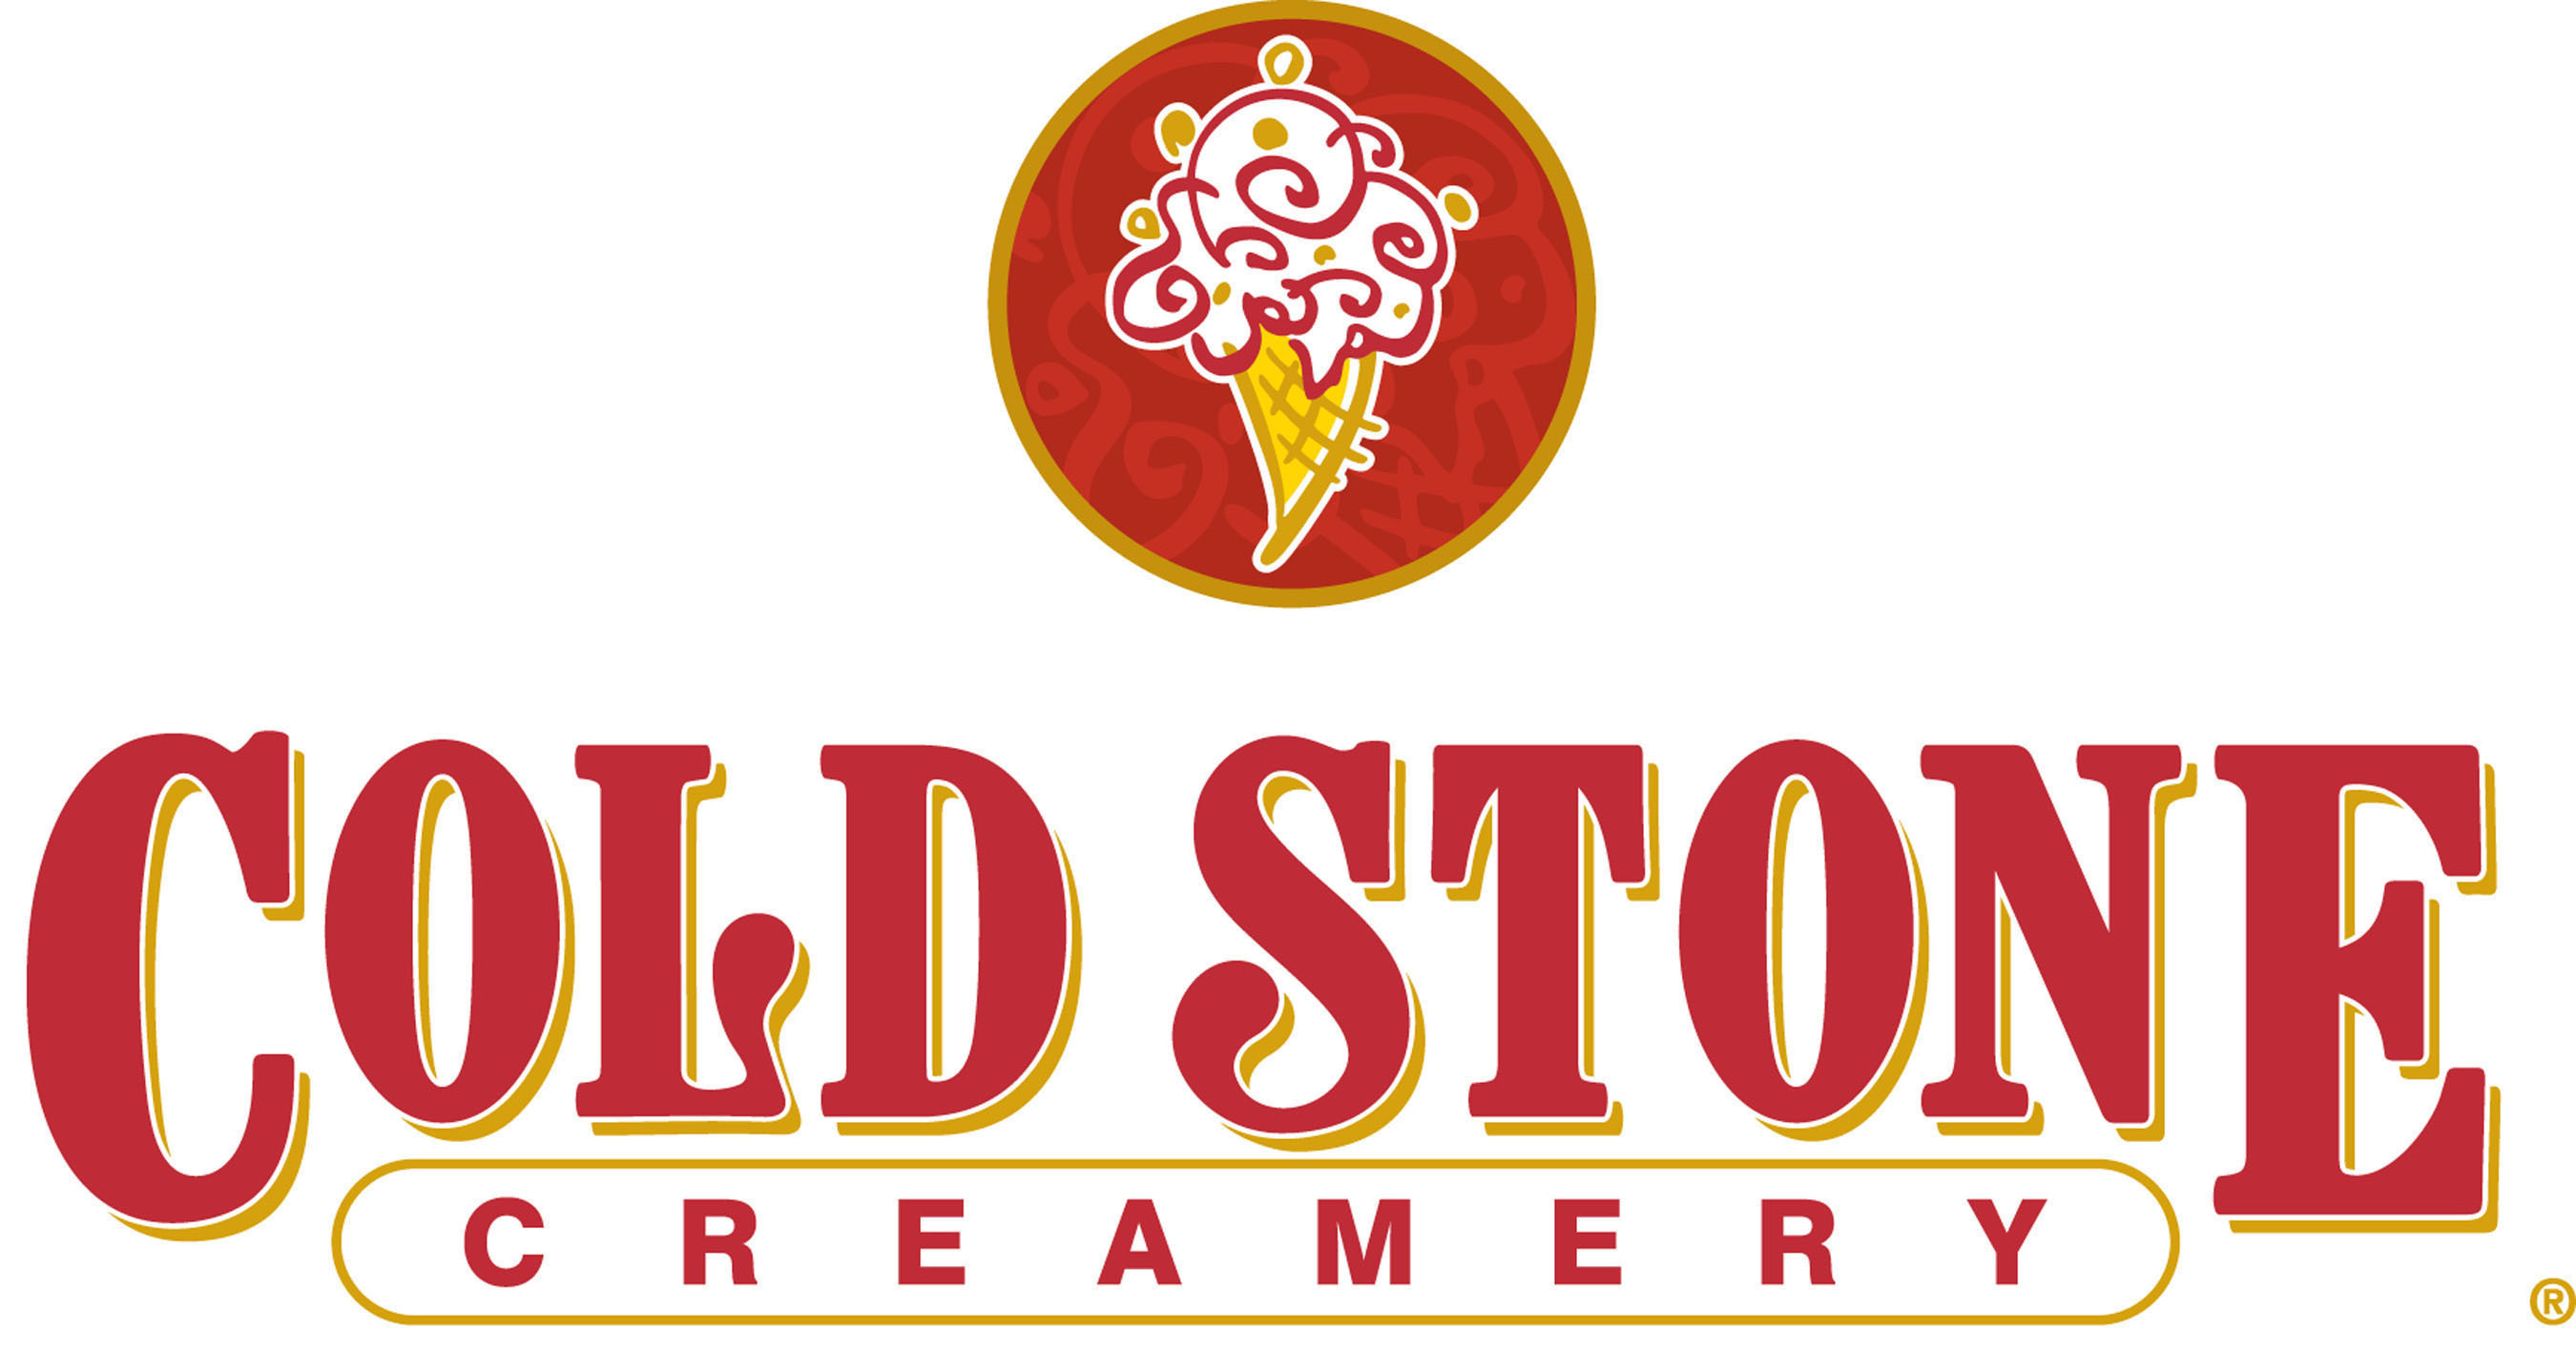 Cold Stone Creamery delivers The Ultimate Ice Cream Experience(r) through a community of franchisees who are passionate about ice cream. The secret recipe for smooth and creamy ice cream is handcrafted fresh daily in each store, and then customized by combining a variety of mix-ins on a frozen granite stone. Headquartered in Scottsdale, Ariz., Cold Stone Creamery is a subsidiary of Kahala, one of the fastest growing franchising companies in the world, with a portfolio of 15 quick-service restaurant brands. Cold Stone Creamery operates more than 1,500 locations in 20 countries. For more information about Cold Stone Creamery, visit www.coldstonecreamery.com.